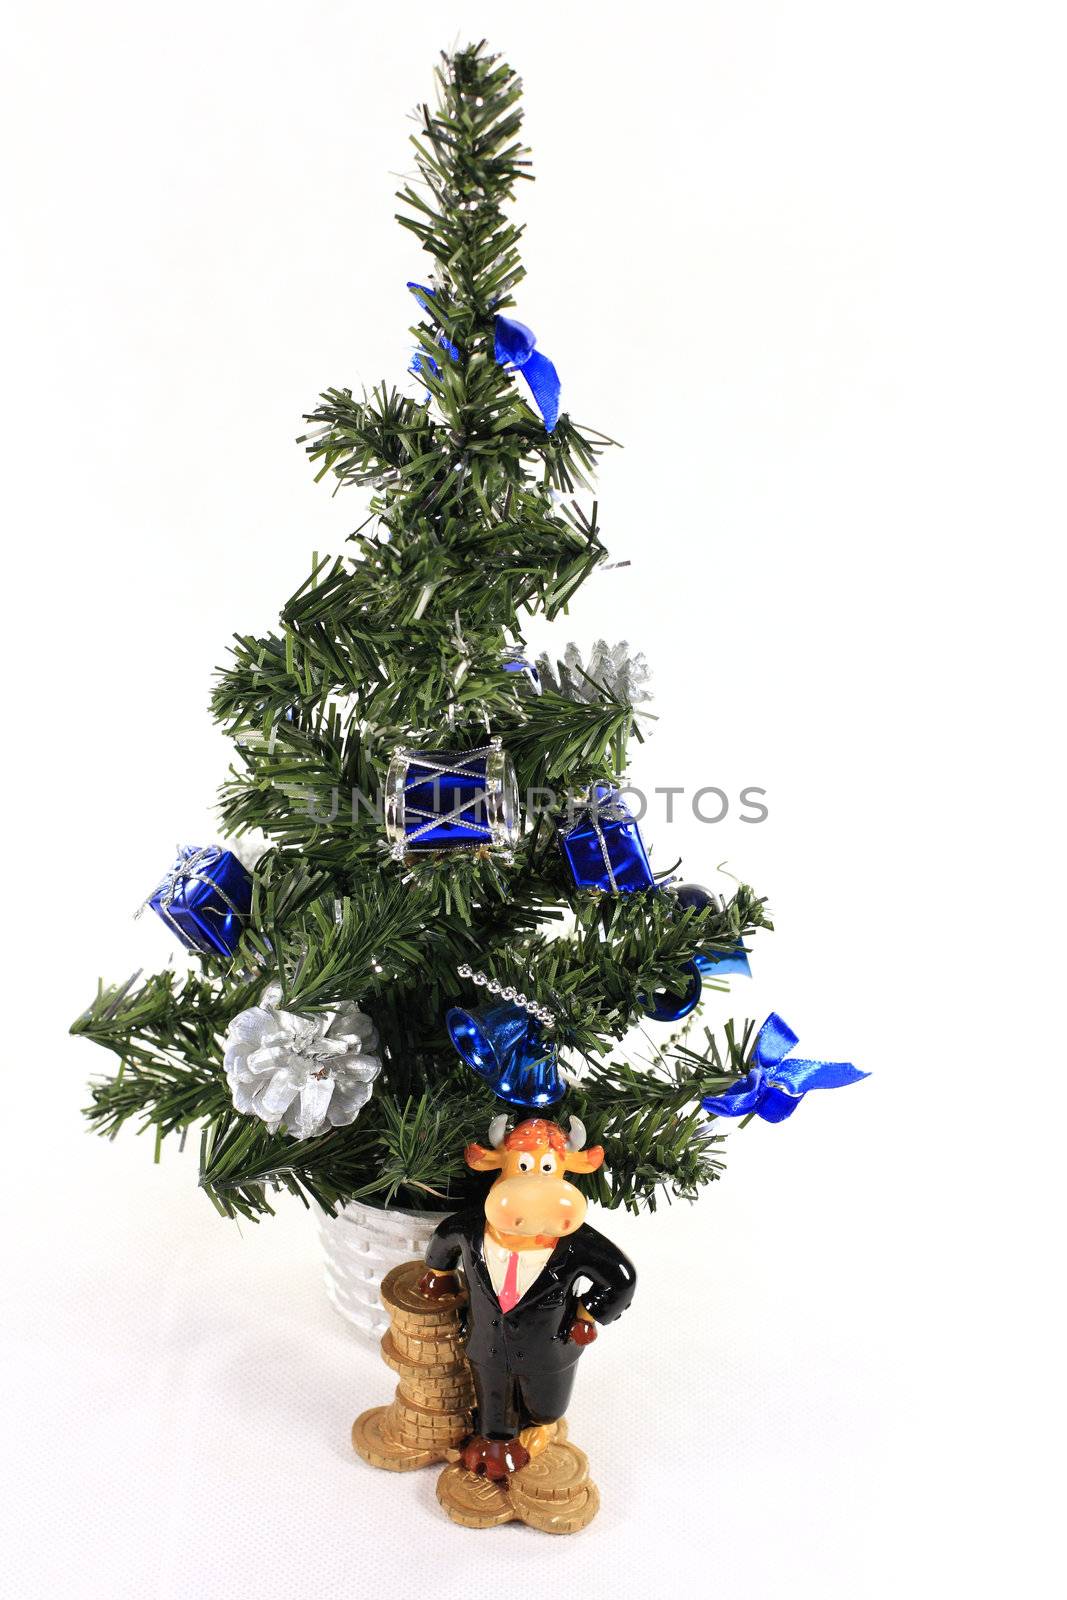 tree, holiday, cow, bull, money, finance, toys, tinsel, garland, ornament, decorate, new, year, christmas, winter, plant
